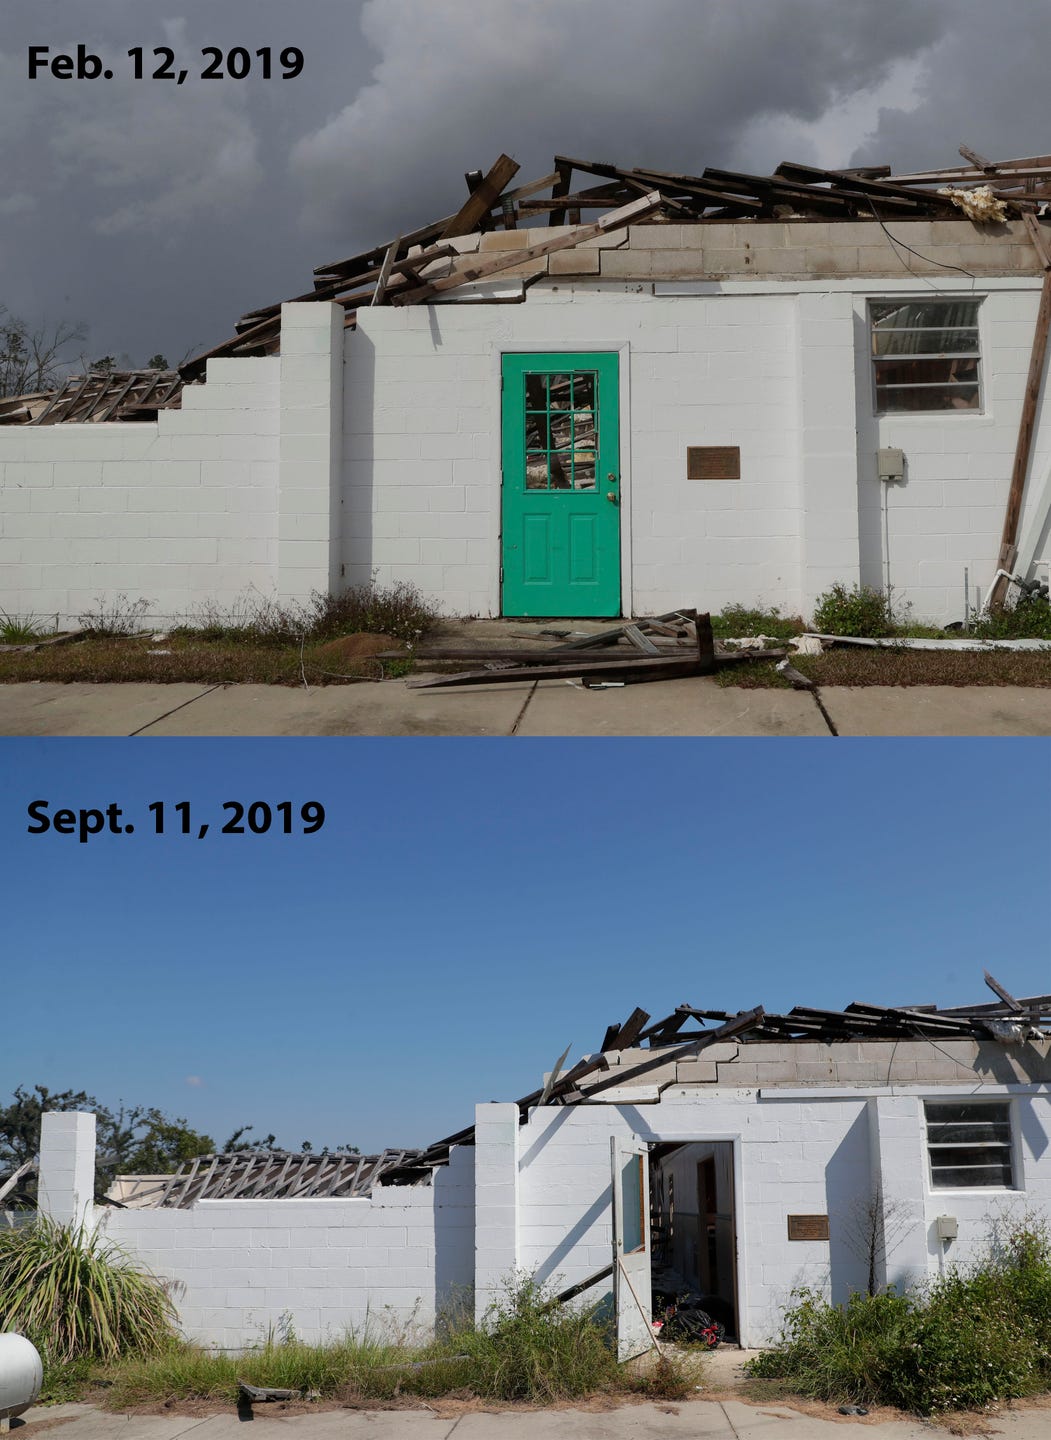 The community center in Altha, Florida after Hurricane Michael, shown on 12 February 2019 (top) and 11 September 2019 (bottom). Photo: Tallahassee Democrat